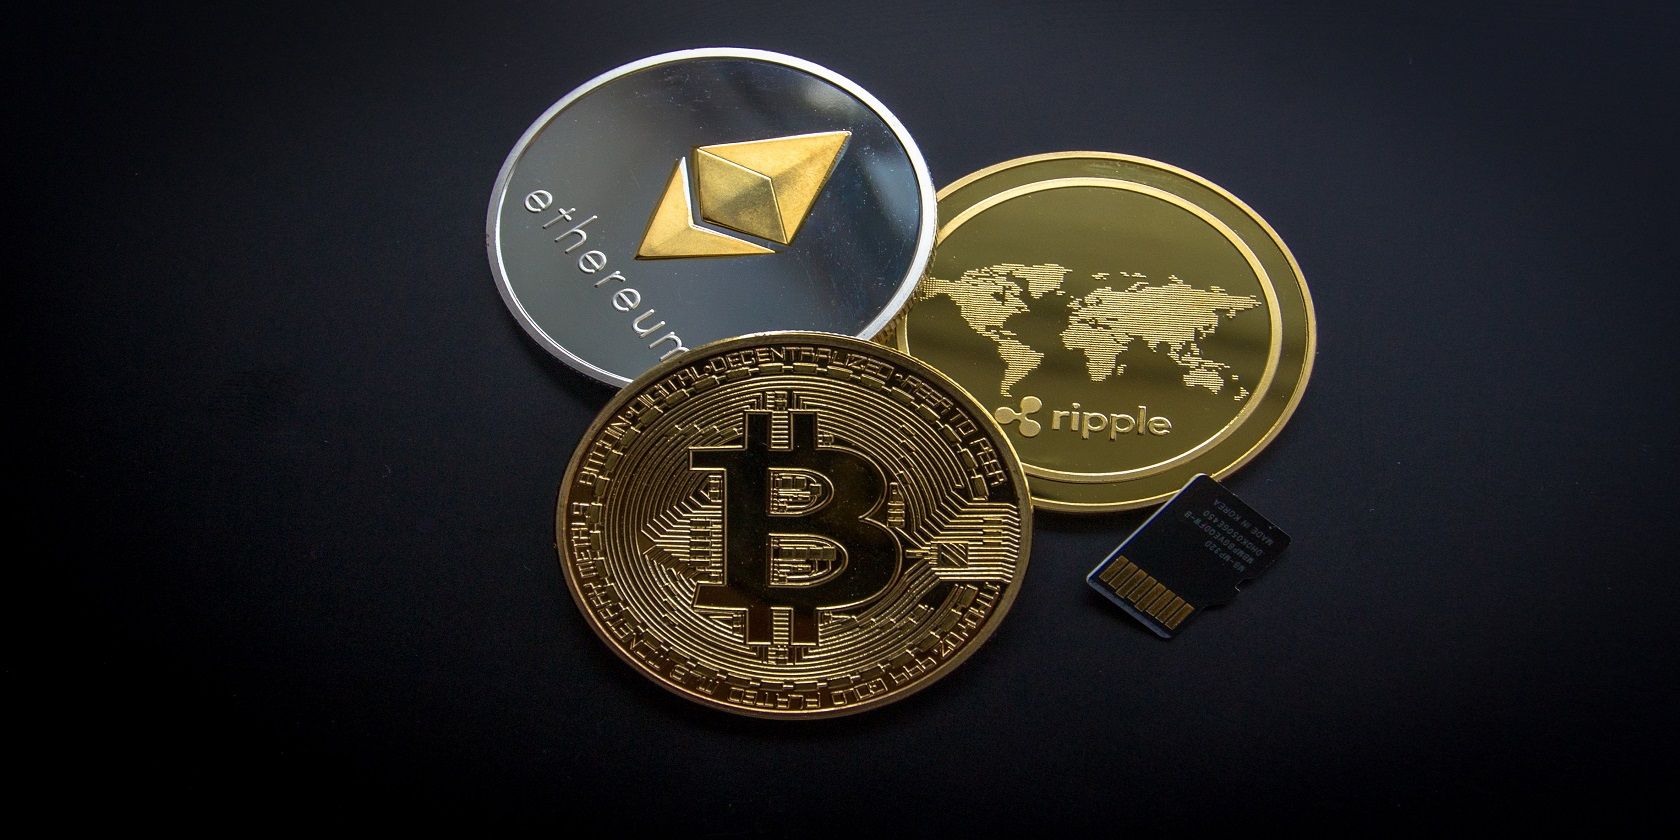 physical bitcoin, ethereum, and ripple coins next to a sim card